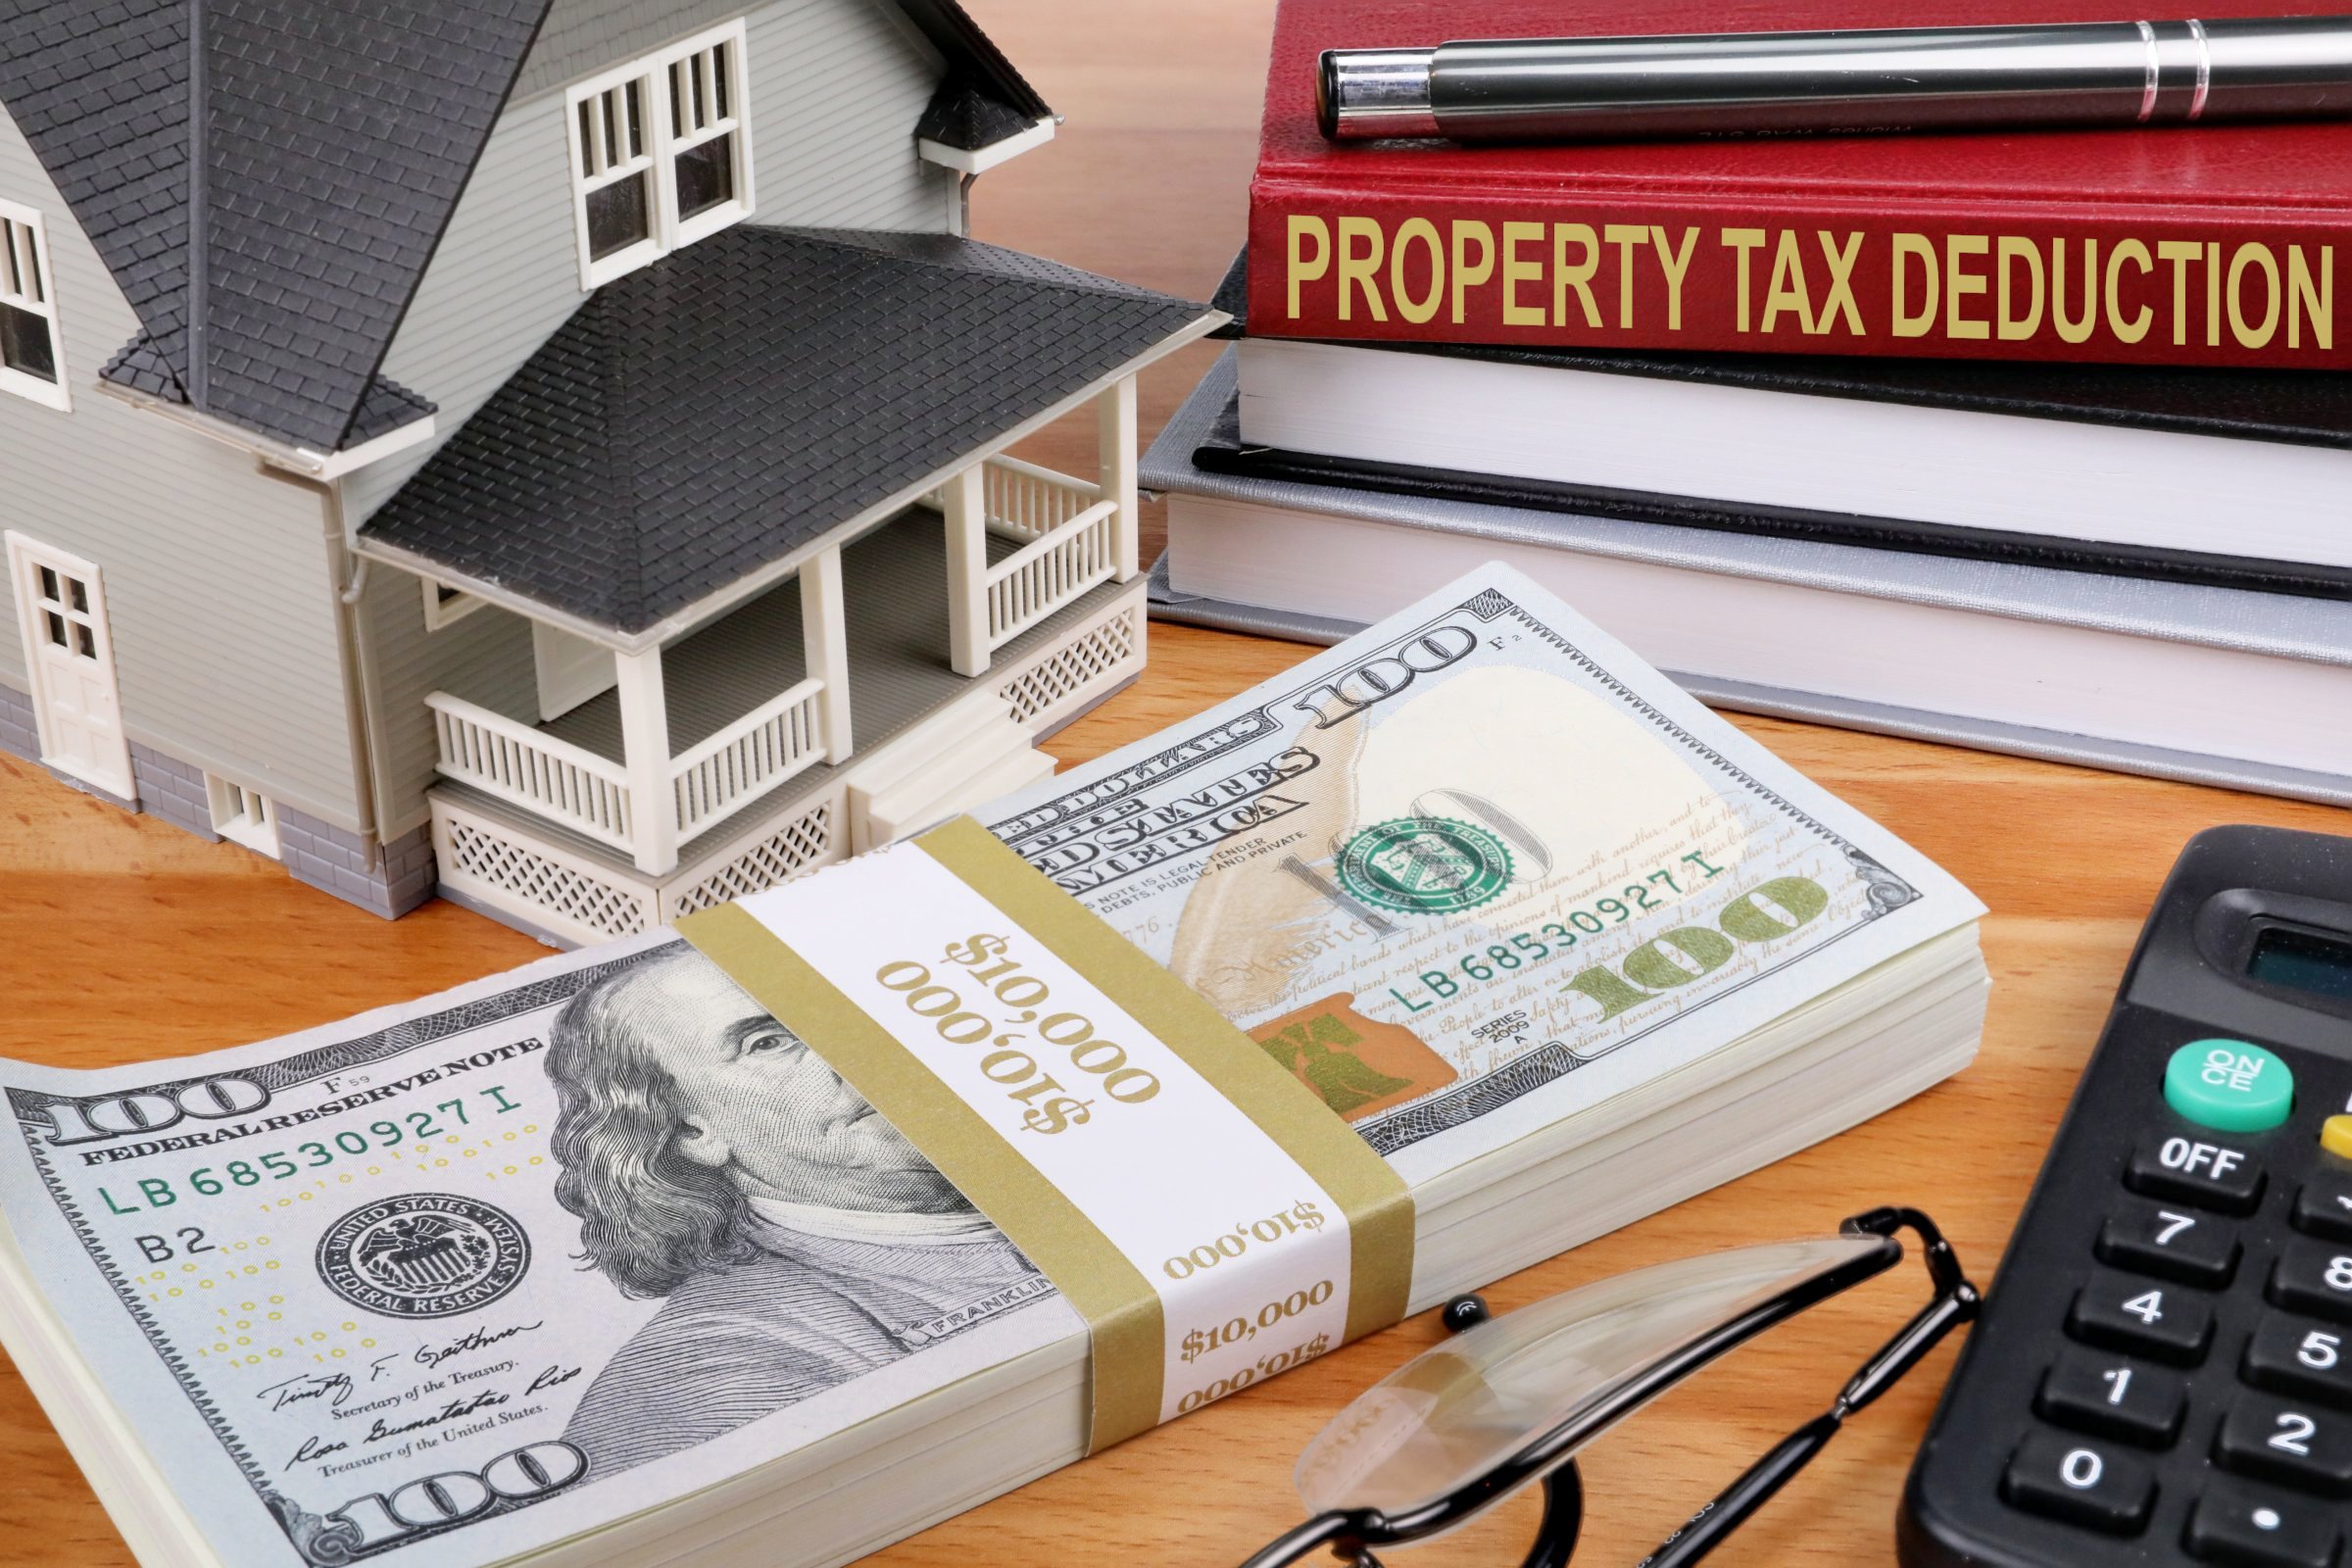 Free of Charge Creative Commons property tax deduction Image Real